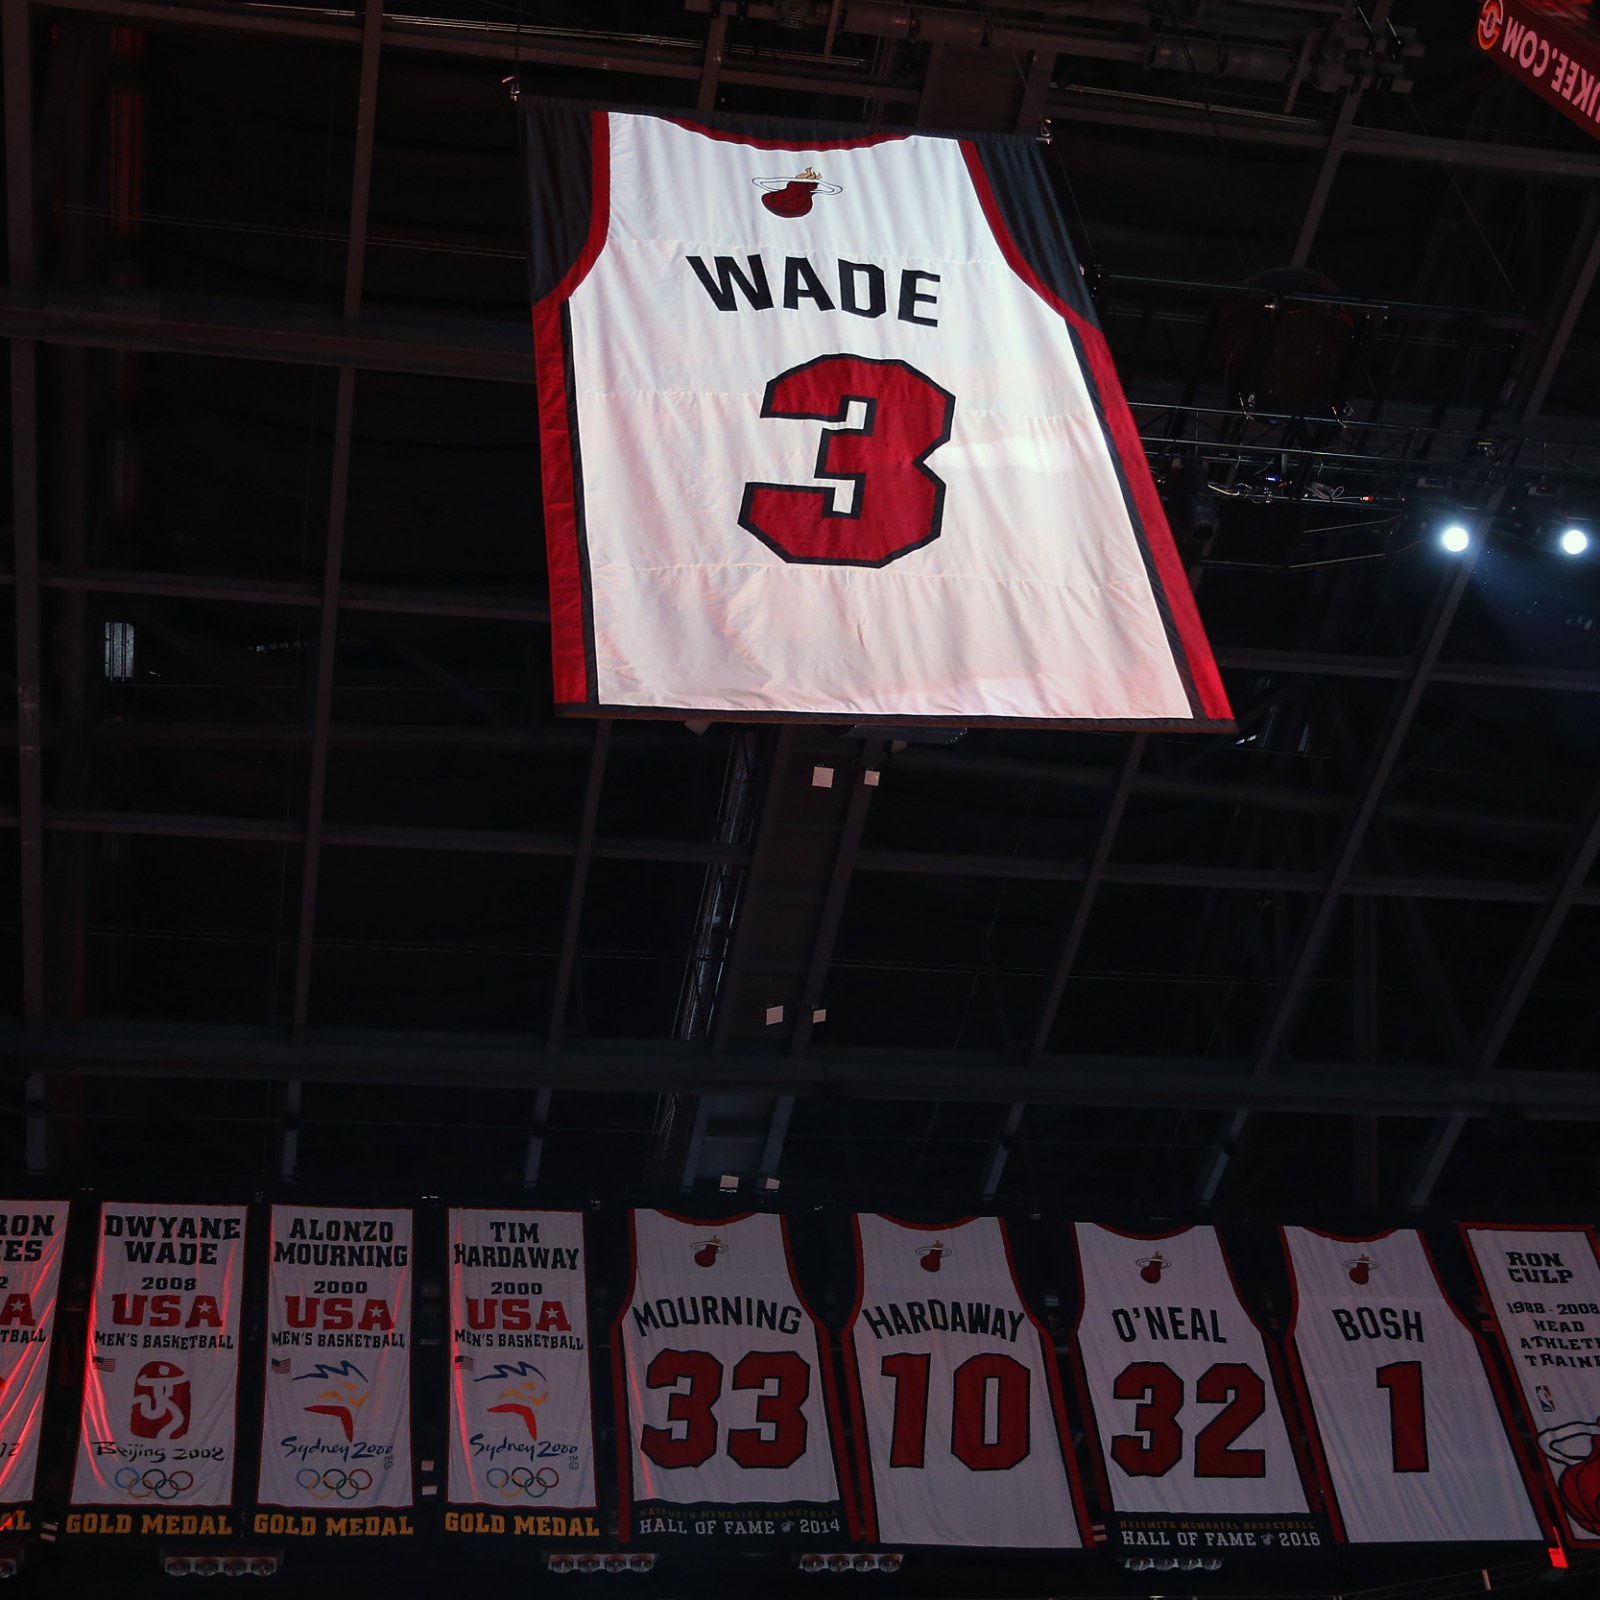 How Dwyane Wade Honored Kobe Bryant at His Jersey Retirement Ceremony